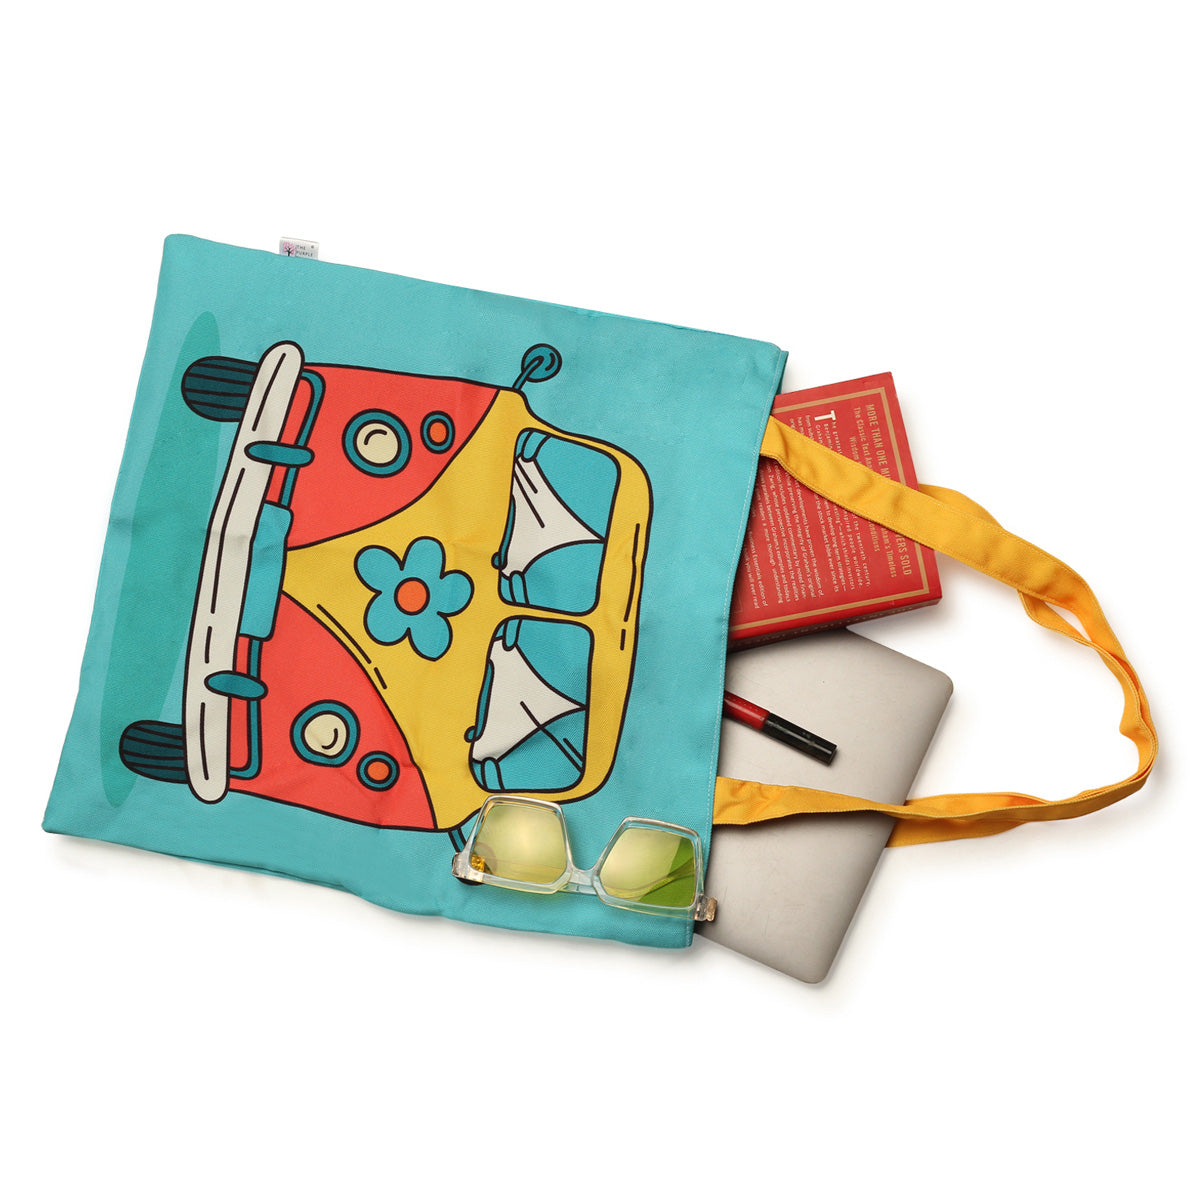 Vibrant tote bag featuring a cute cartoon van in yellow red and teal color with yellow color handle